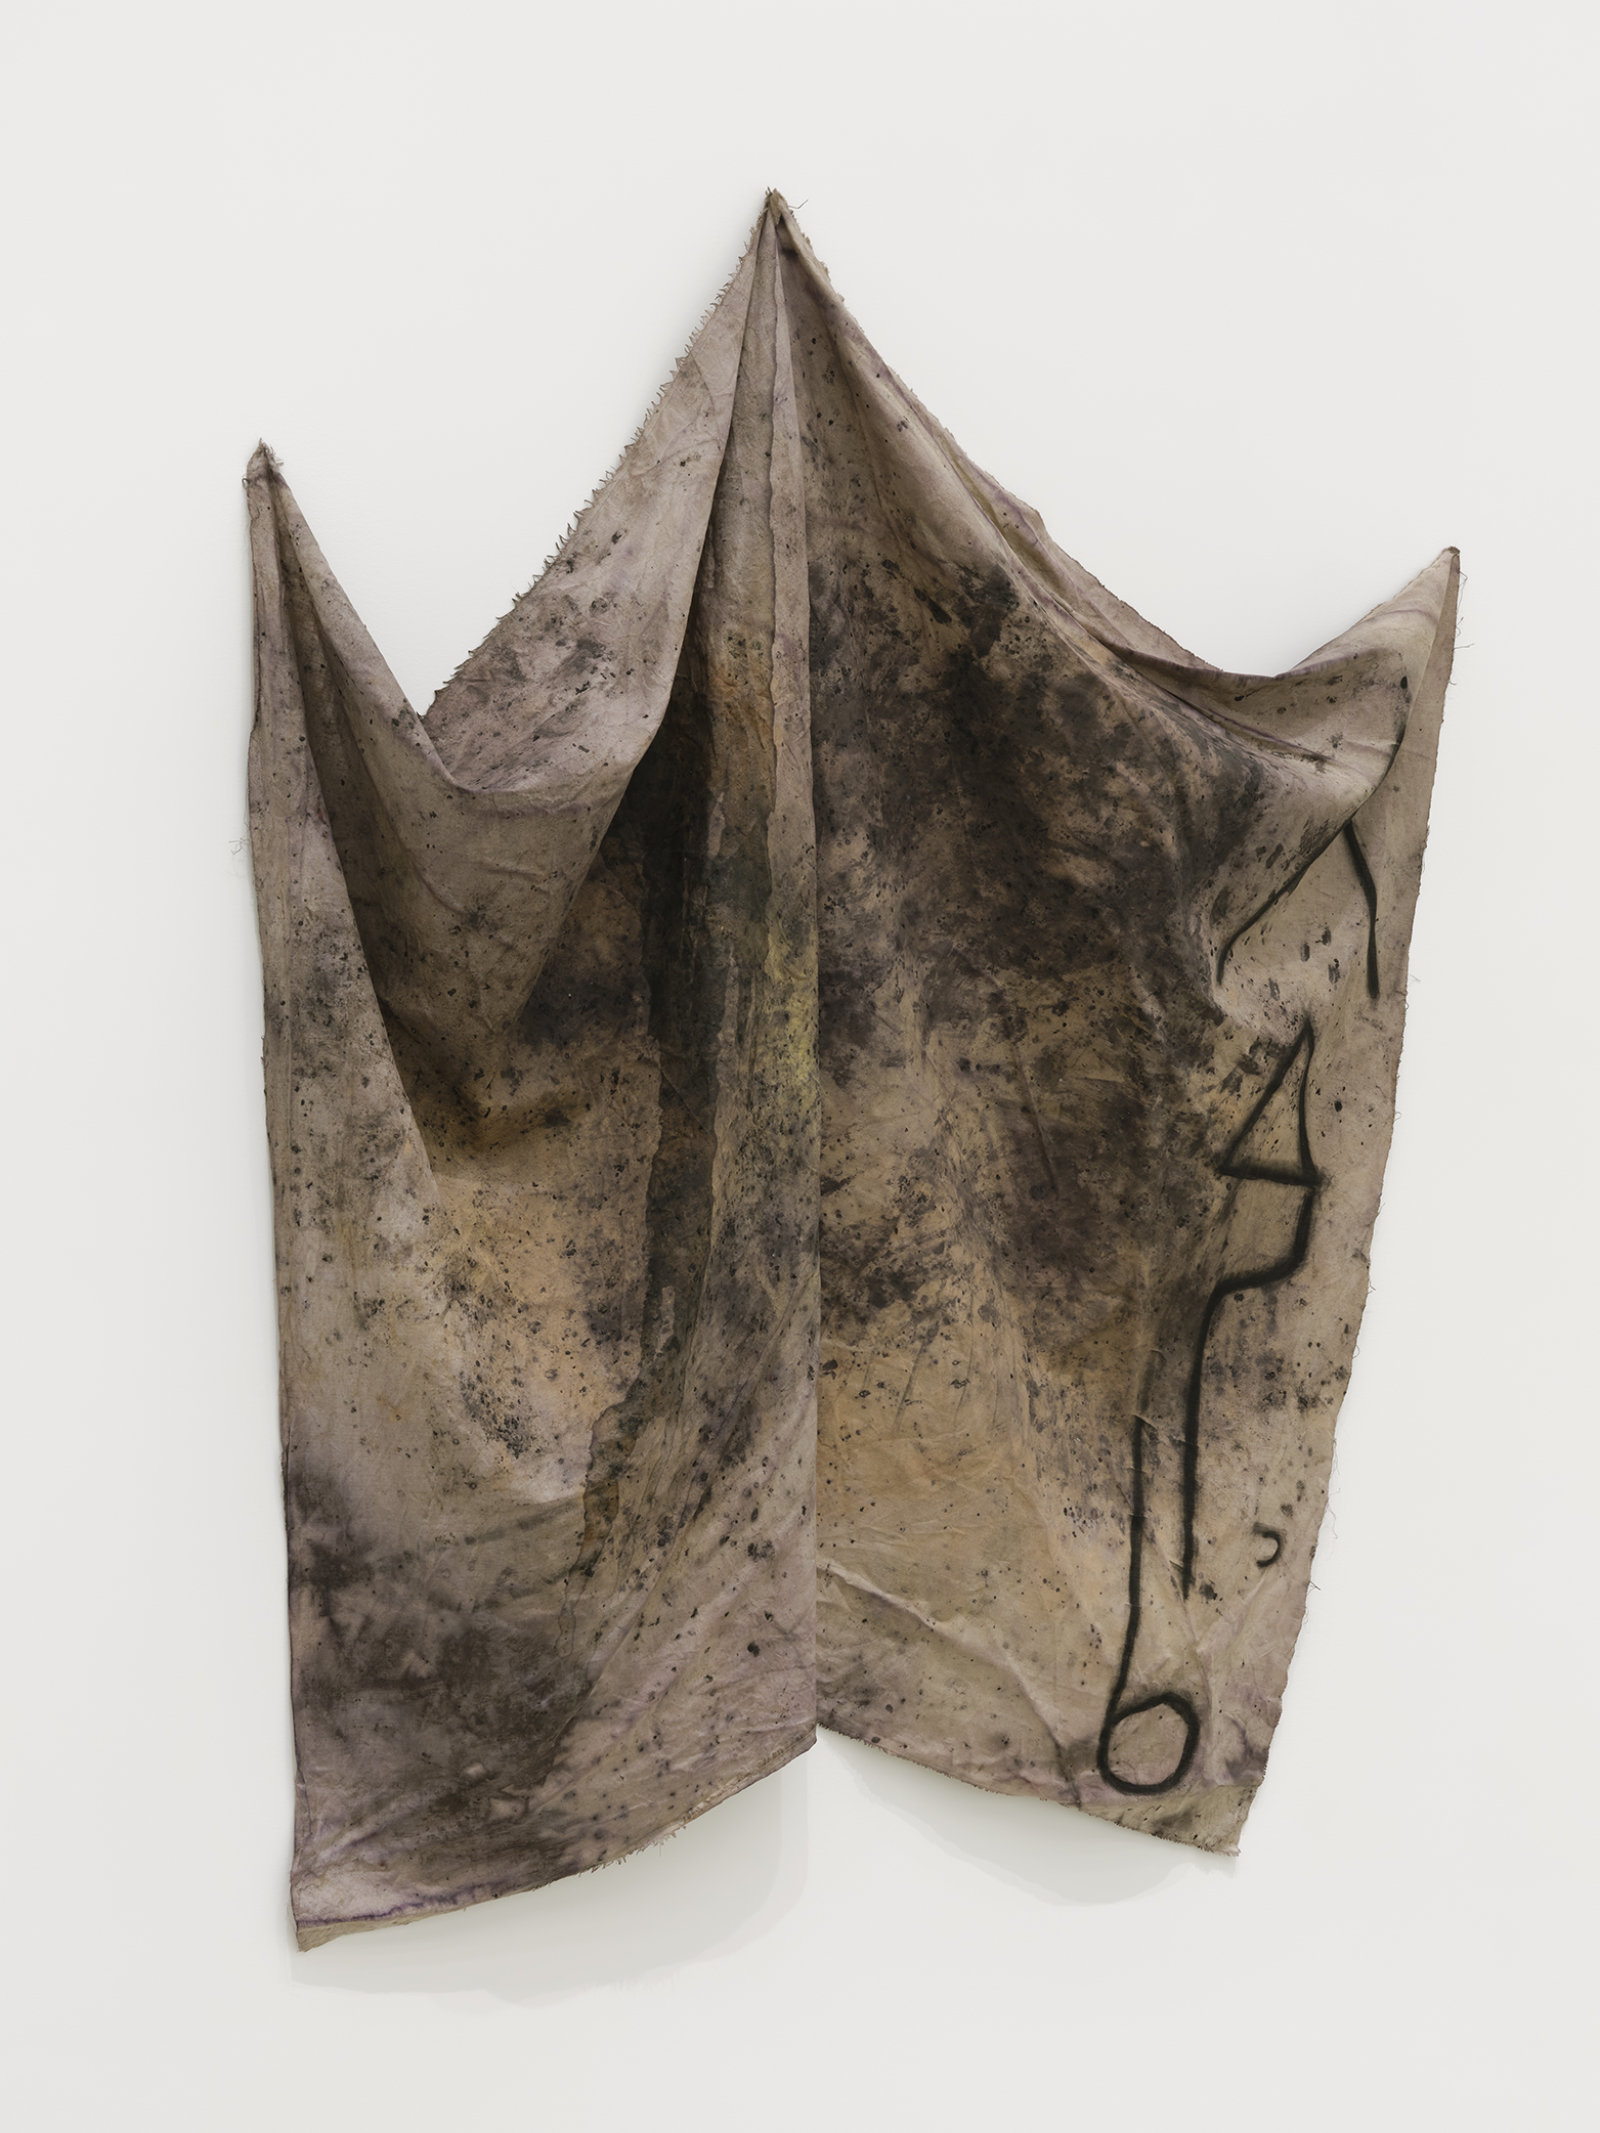 Duane Linklater, crust cloth remnant, 2021, linen, cochineal dye, yellow ochre, honey, charcoal, nails, 66 x 56 x 7 in. (168 x 141 x 18 cm)